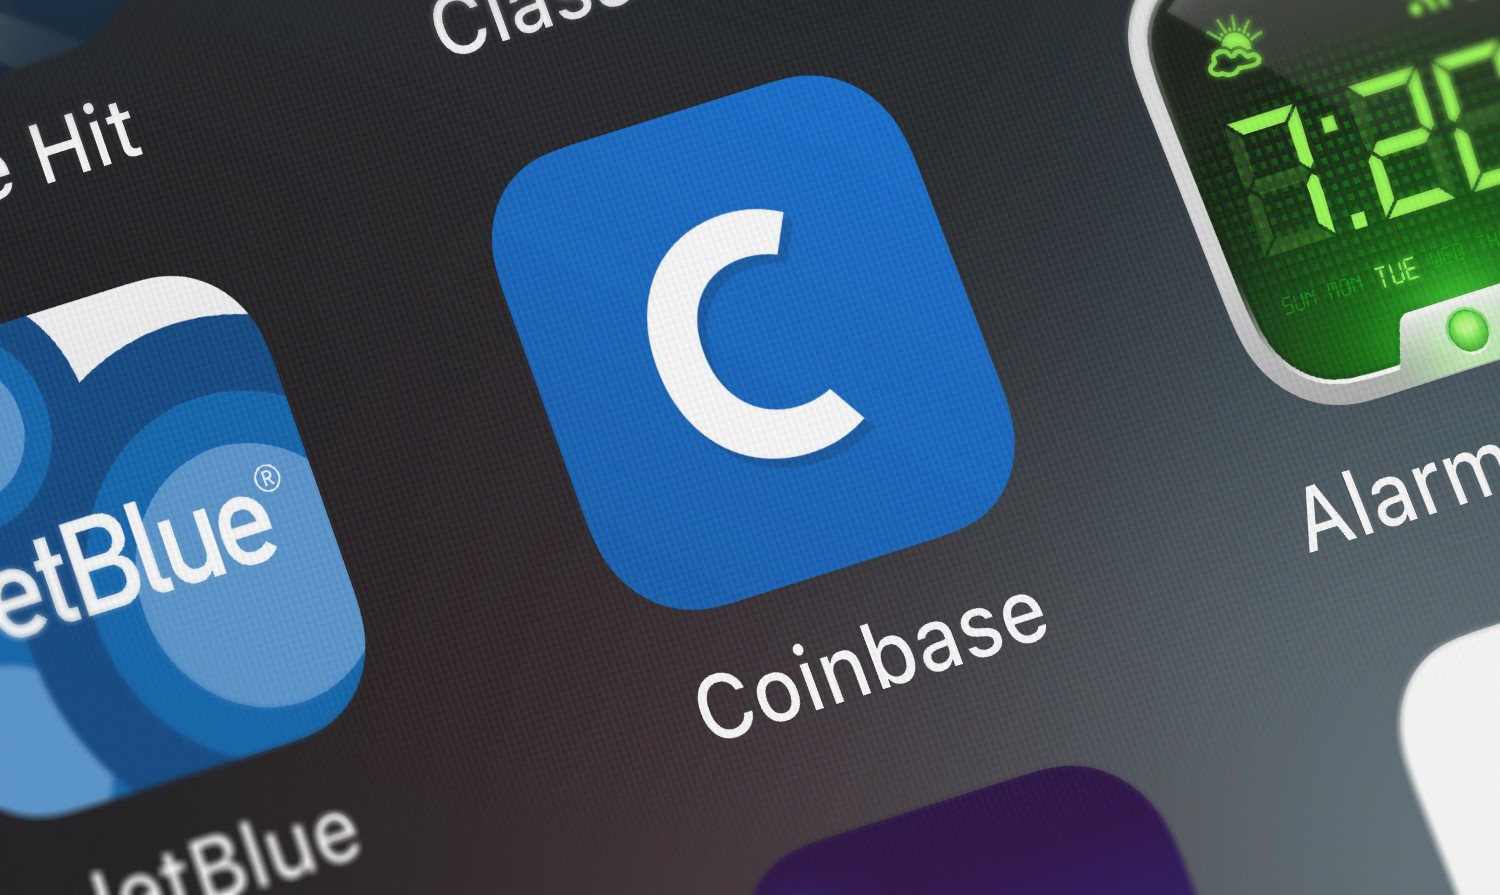 Coinbase Adds Support For EOS Cryptocurrency On Retail Site And Apps